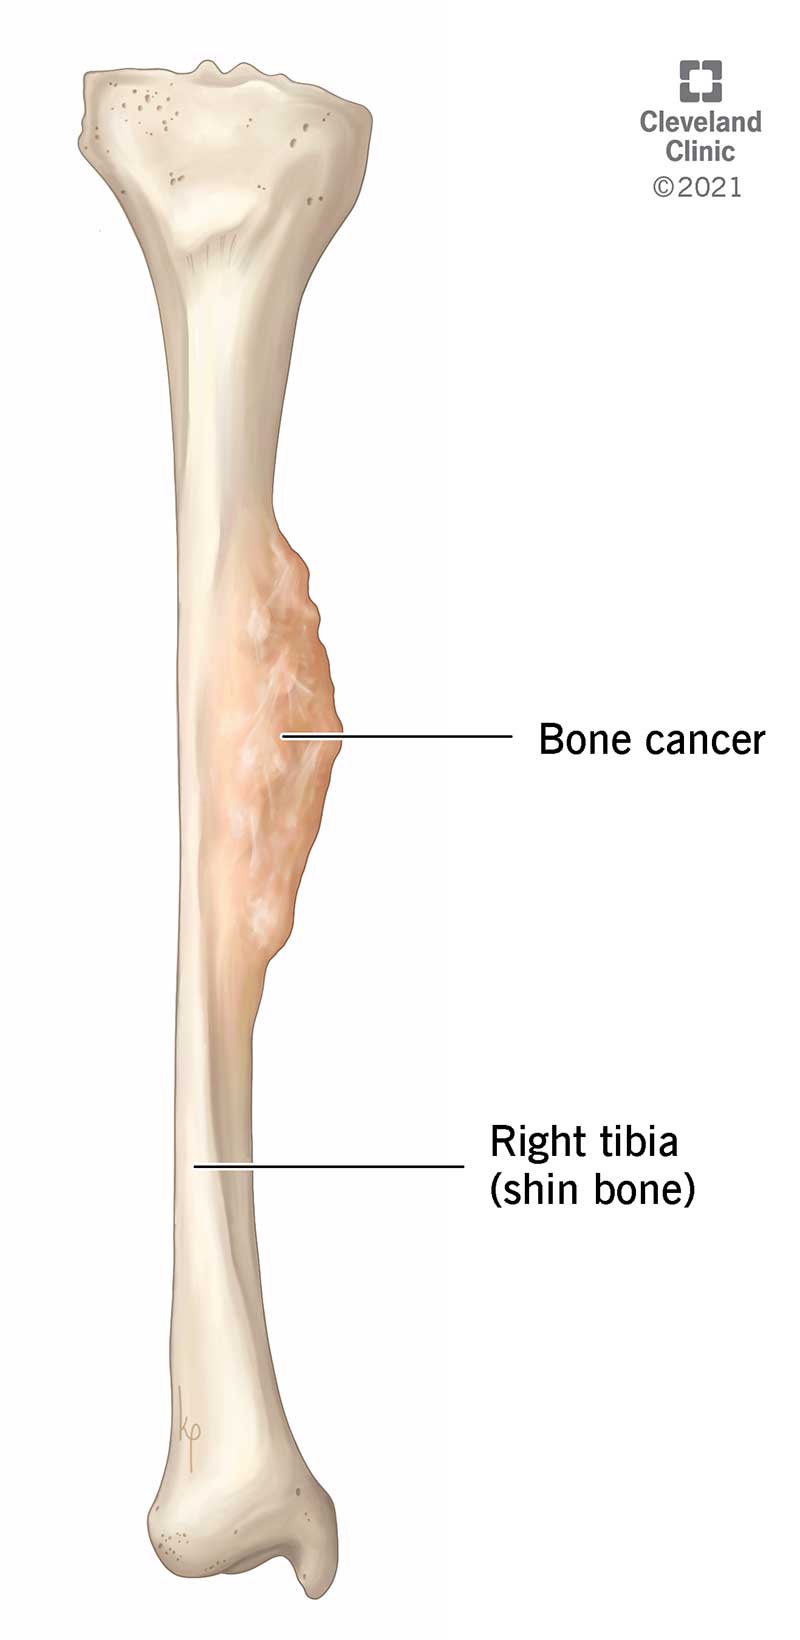 Bone cancer is defined as a mass of benign or cancerous cells growing in a bone.